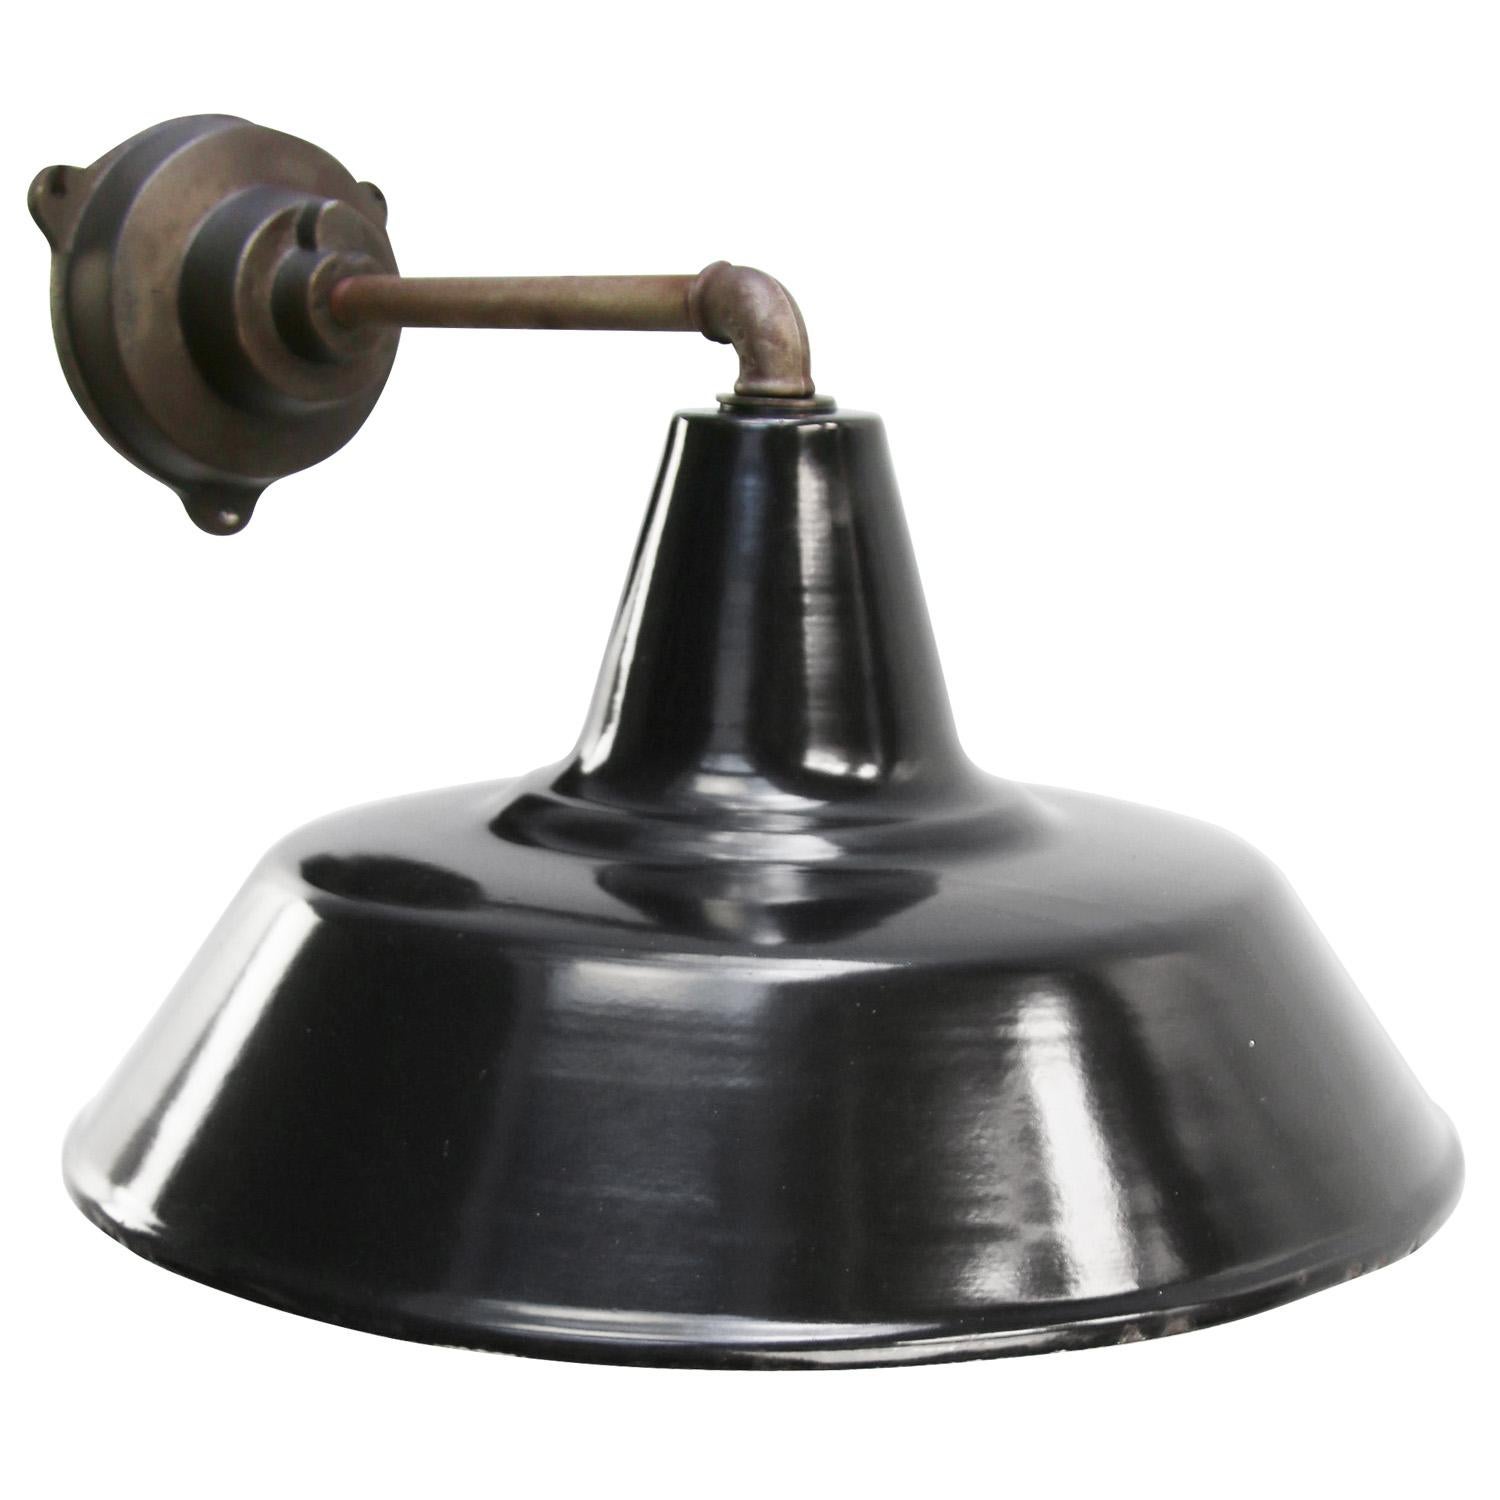 factory wall light
black enamel, white interior

Diameter cast iron wall piece: 12 cm, 3 holes to secure

Weight: 3.10 kg / 6.8 lb

Priced per individual item. All lamps have been made suitable by international standards for incandescent